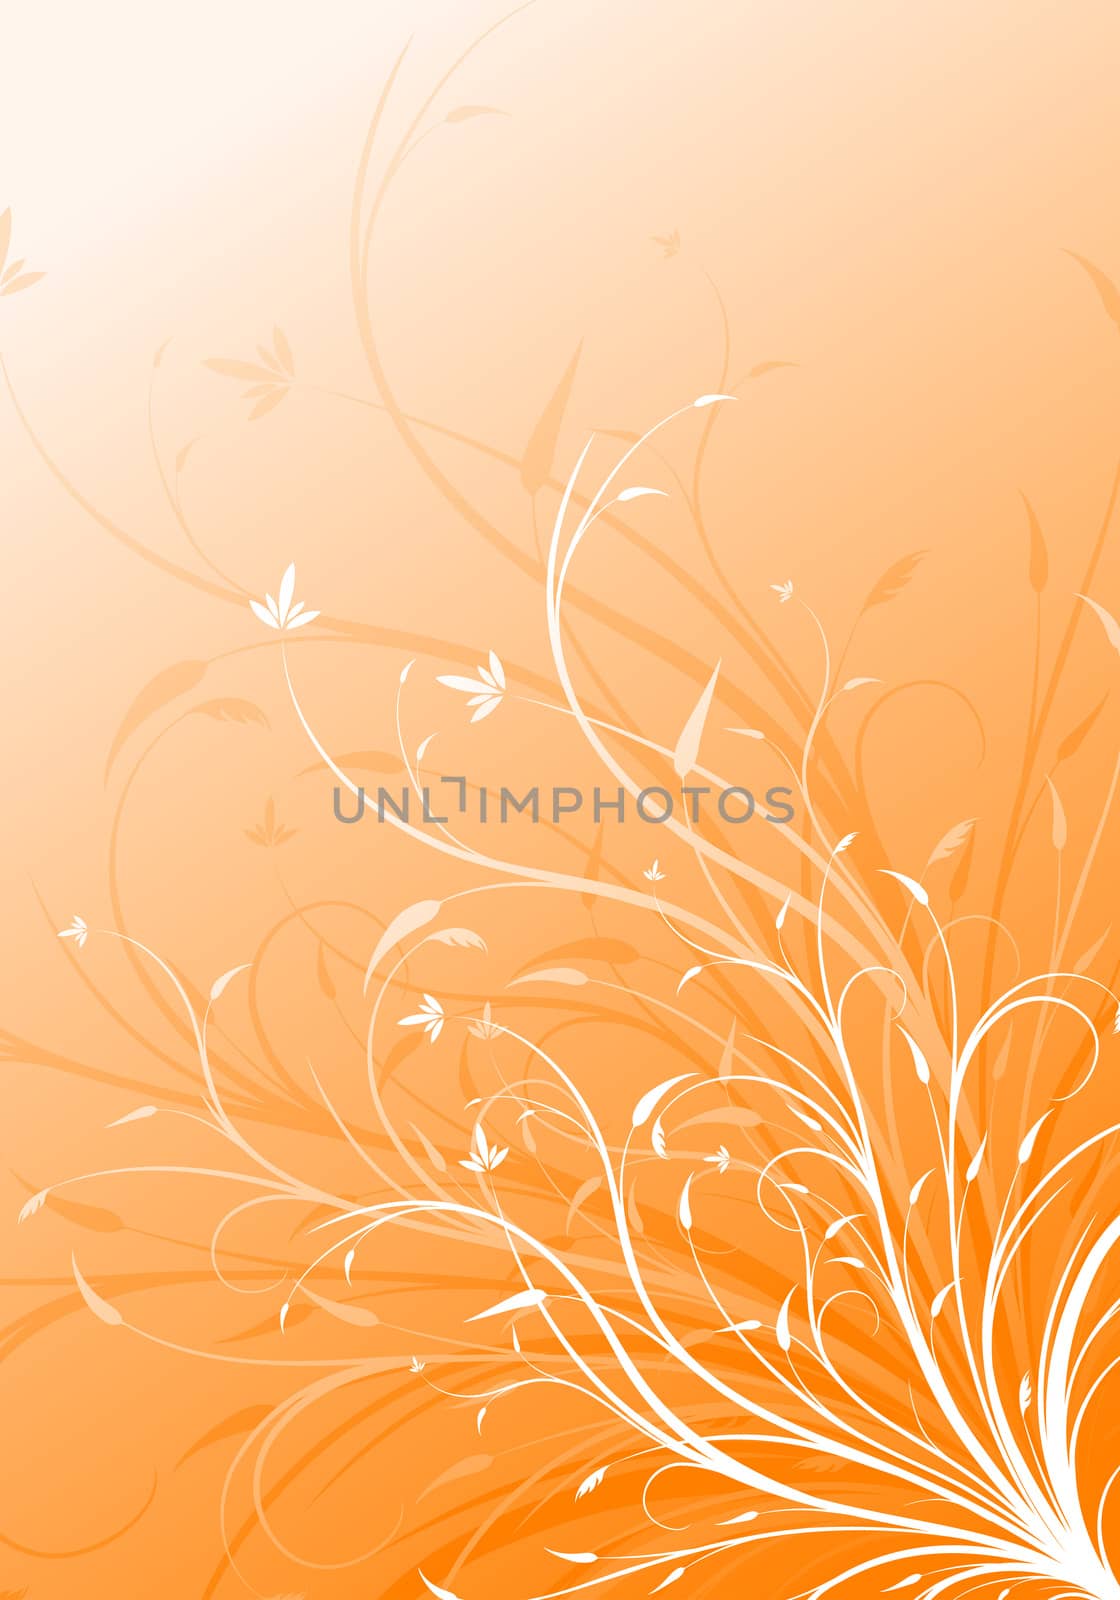 abstract spring floral decorative background vector illustration by WaD